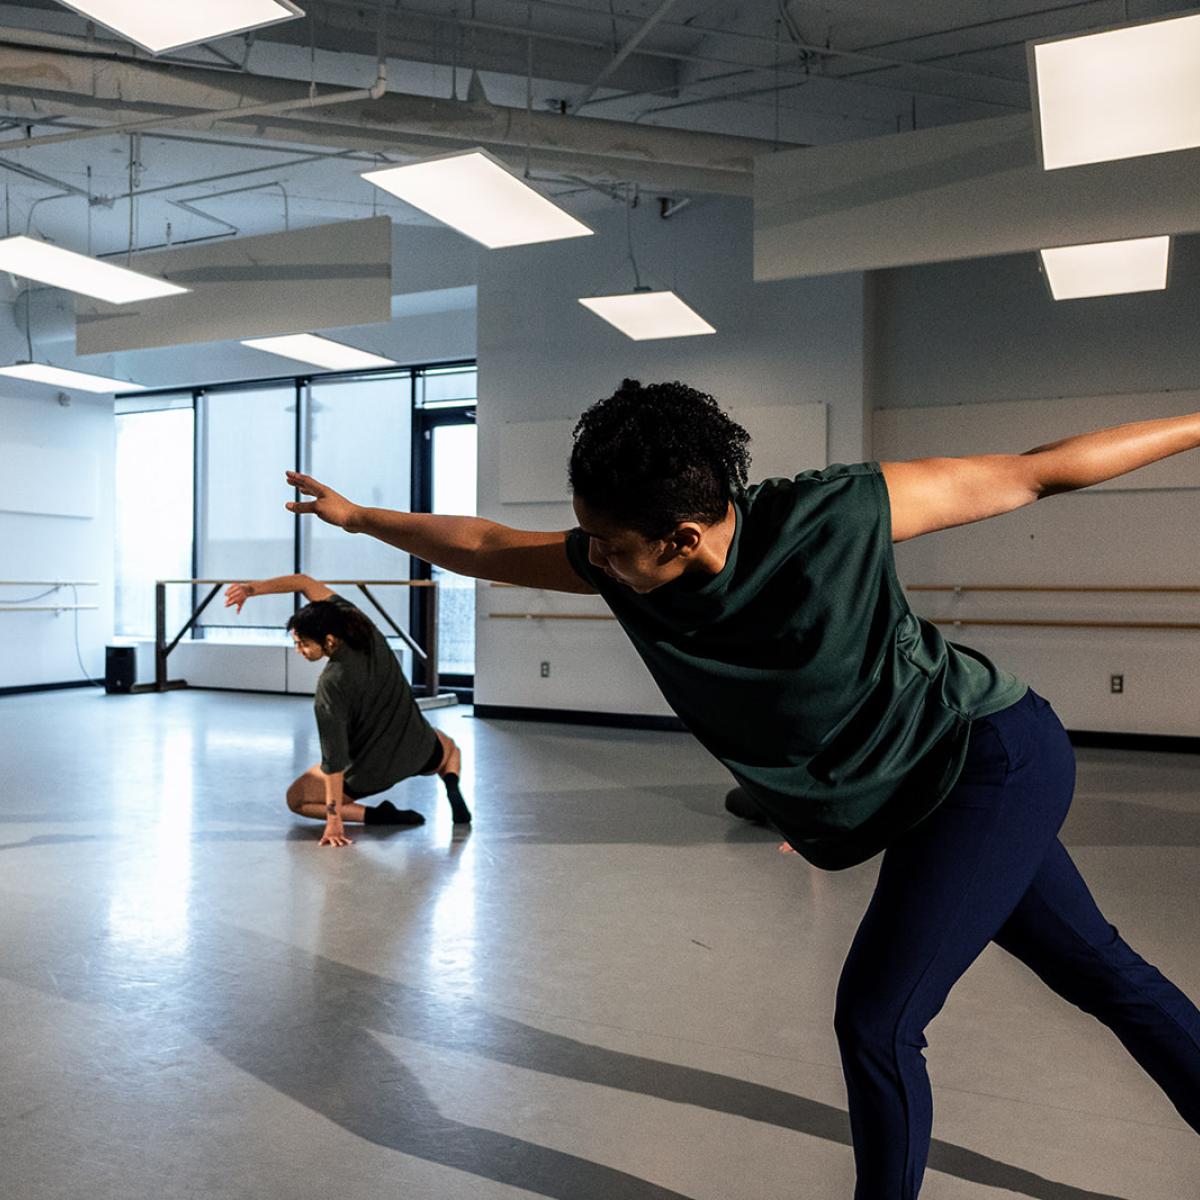 Three people dance in a bright studio space